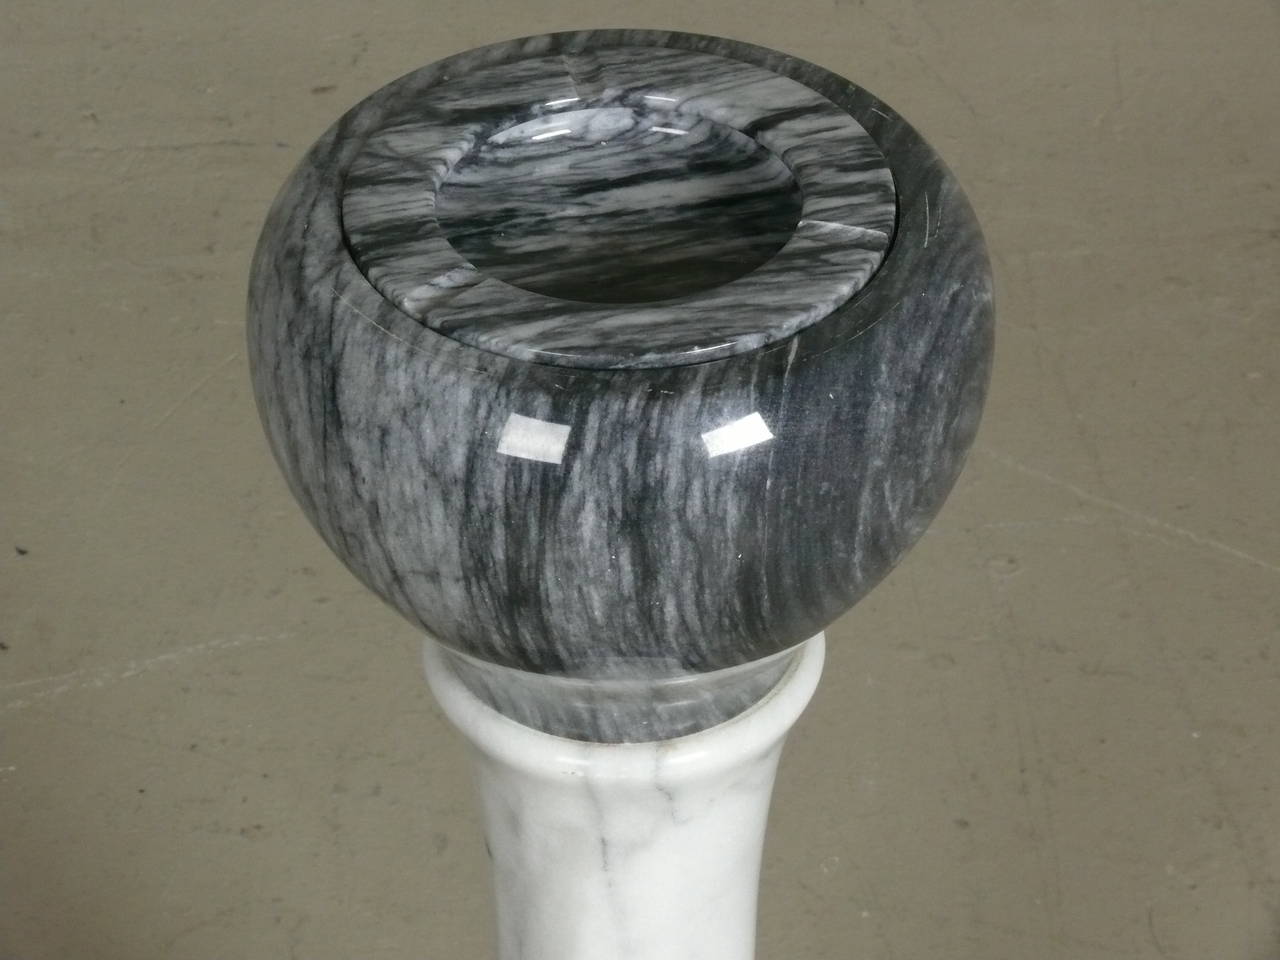 Rare c.1968 sculptural marble ashtray stand with removable ashtray (then could be used as a plant stand) from Italy by Angelo Mangiarotti for Knoll.